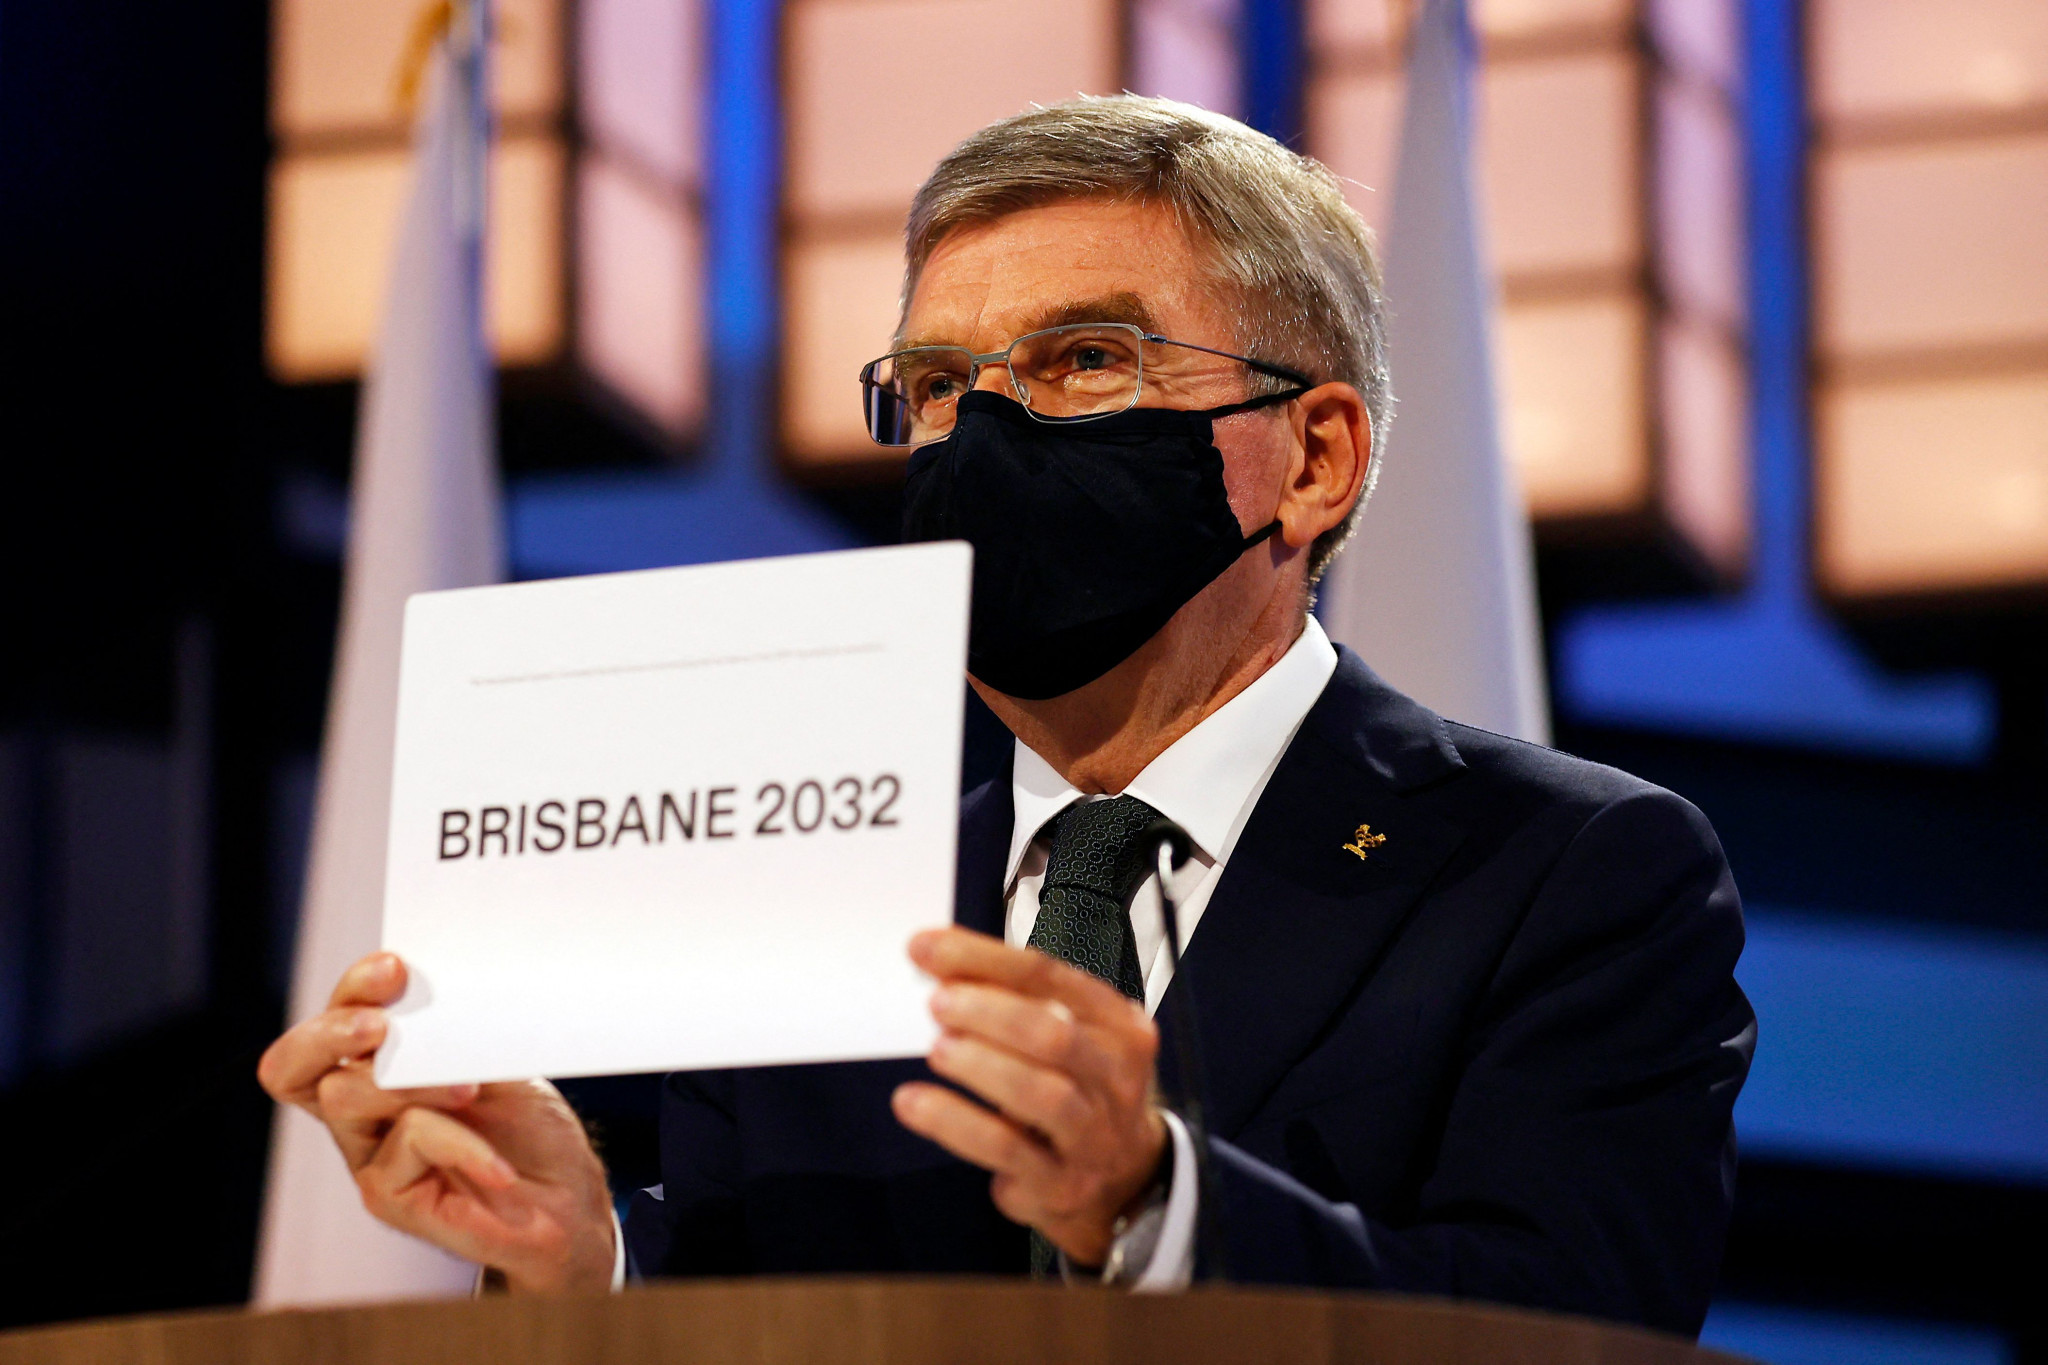 Australia is set to host the Olympic Games in Brisbane in 2032 ©Getty Images